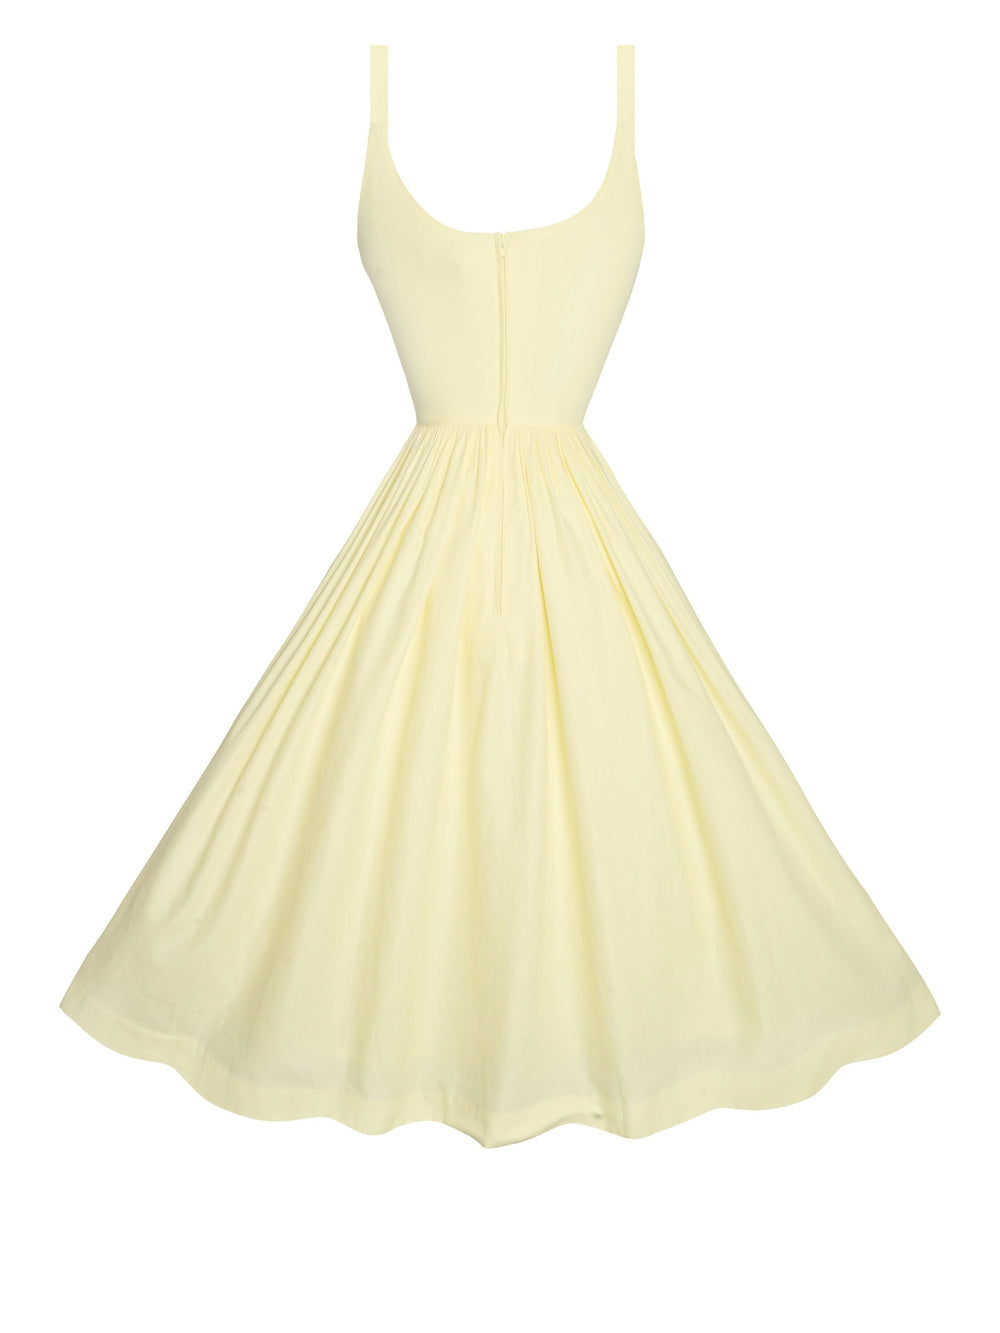 MTO - Penelope Dress "I can't believe its not Butter" in Light Pale Yellow Cotton